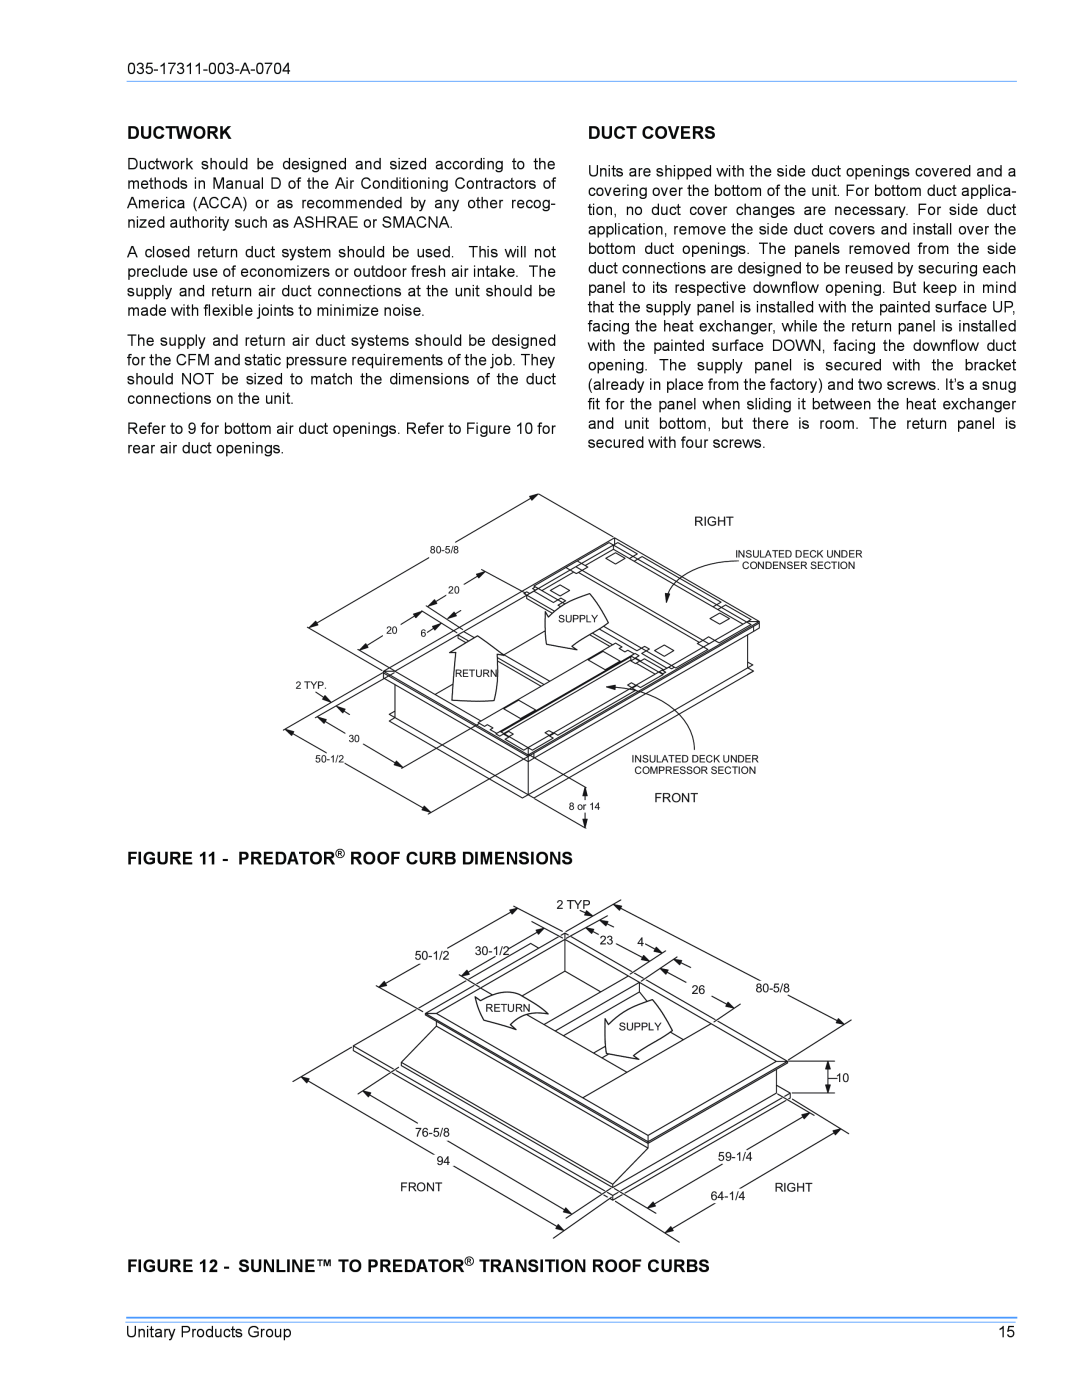 York DM090 installation manual Ductwork, Duct Covers, Predator Roof Curb Dimensions 